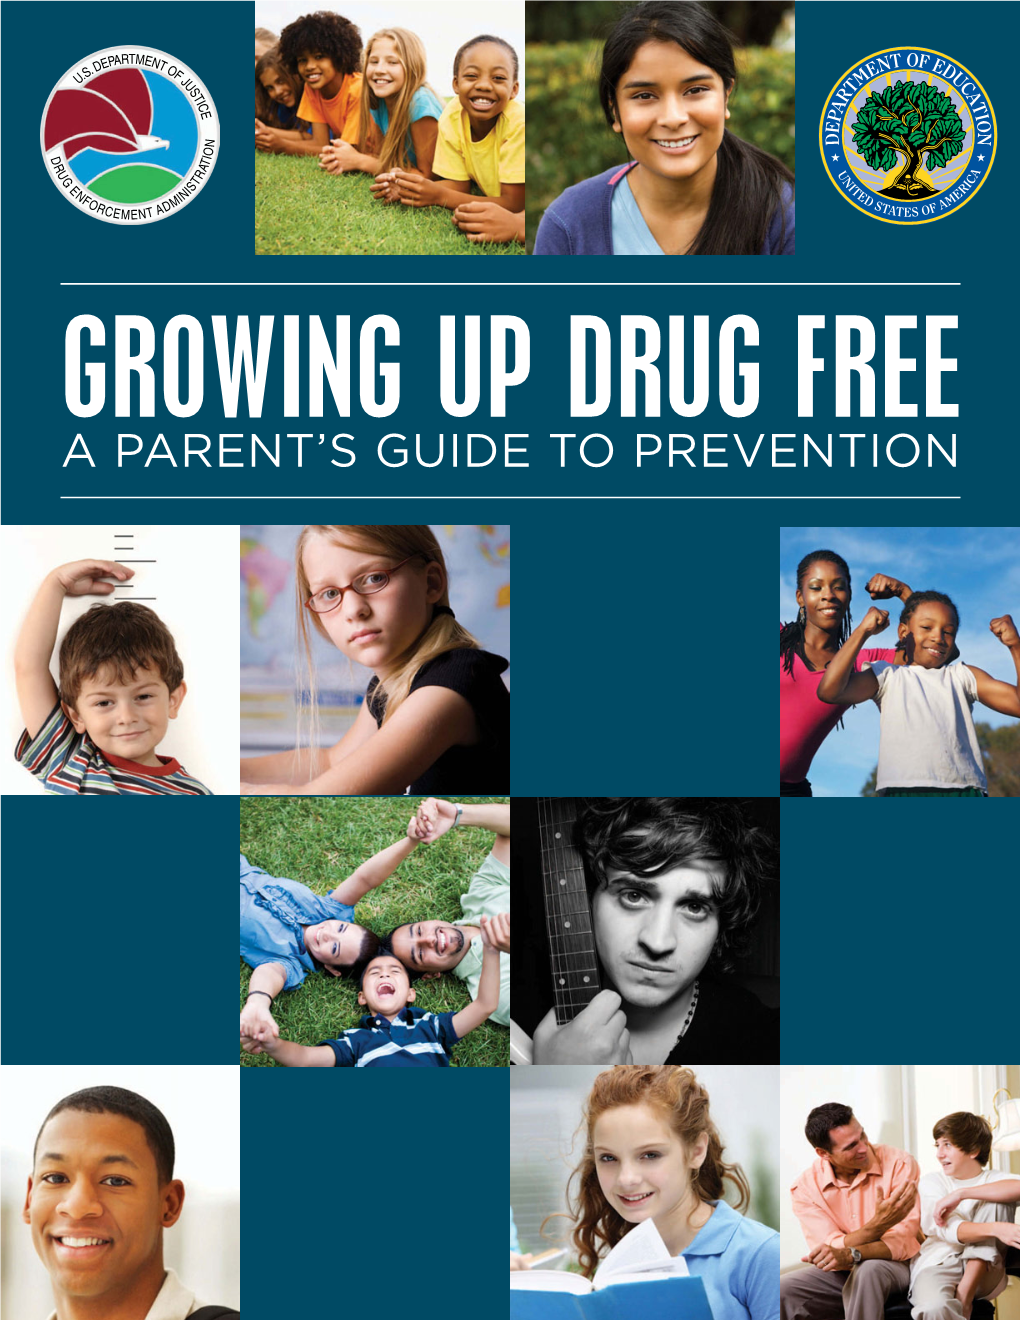 Growing up Drug Free: a Parent's Guide to Prevention